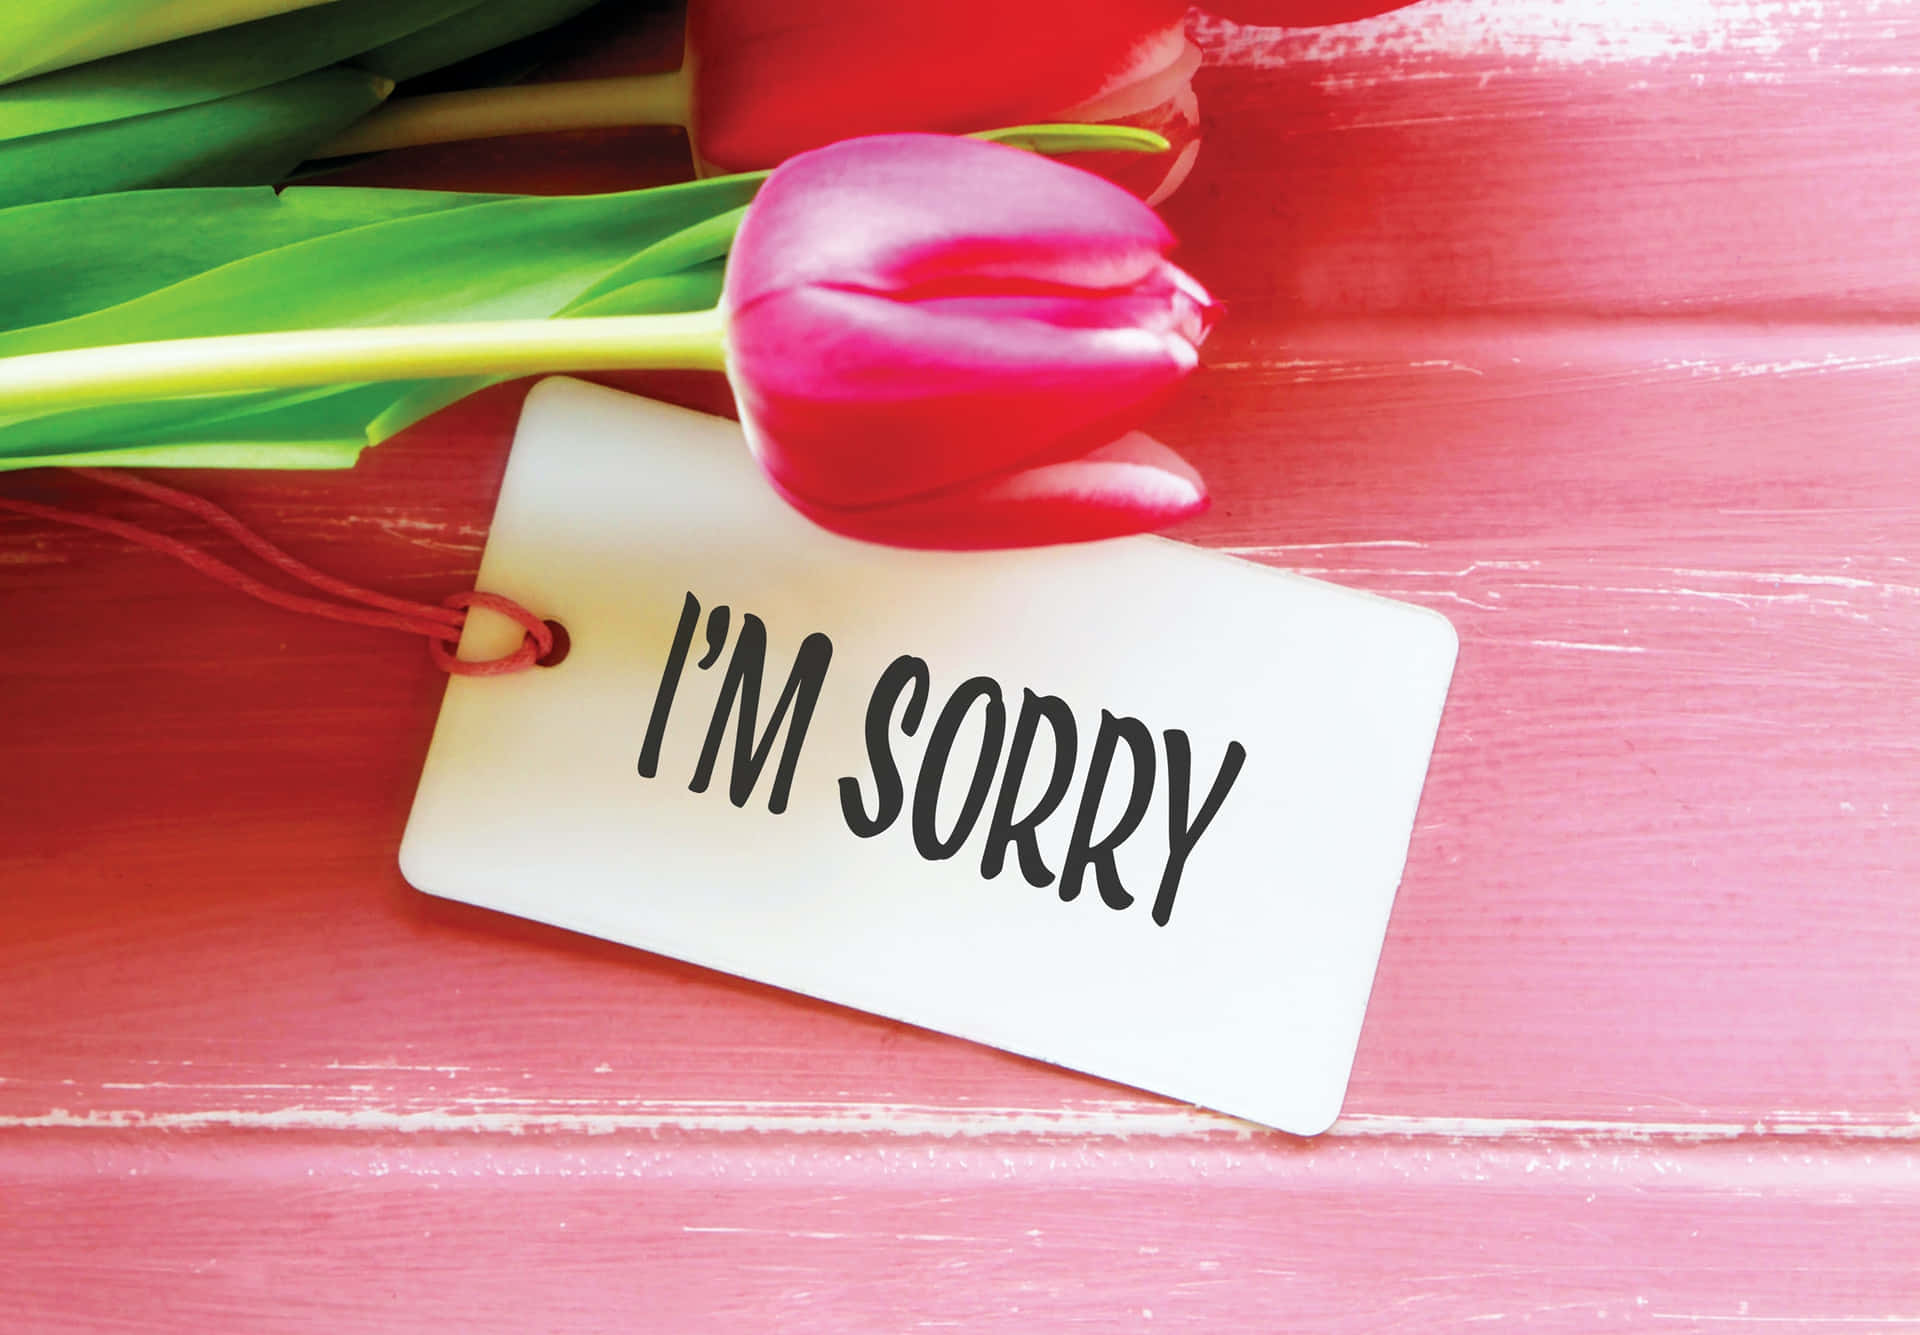 Expressive Apology With Red Rose